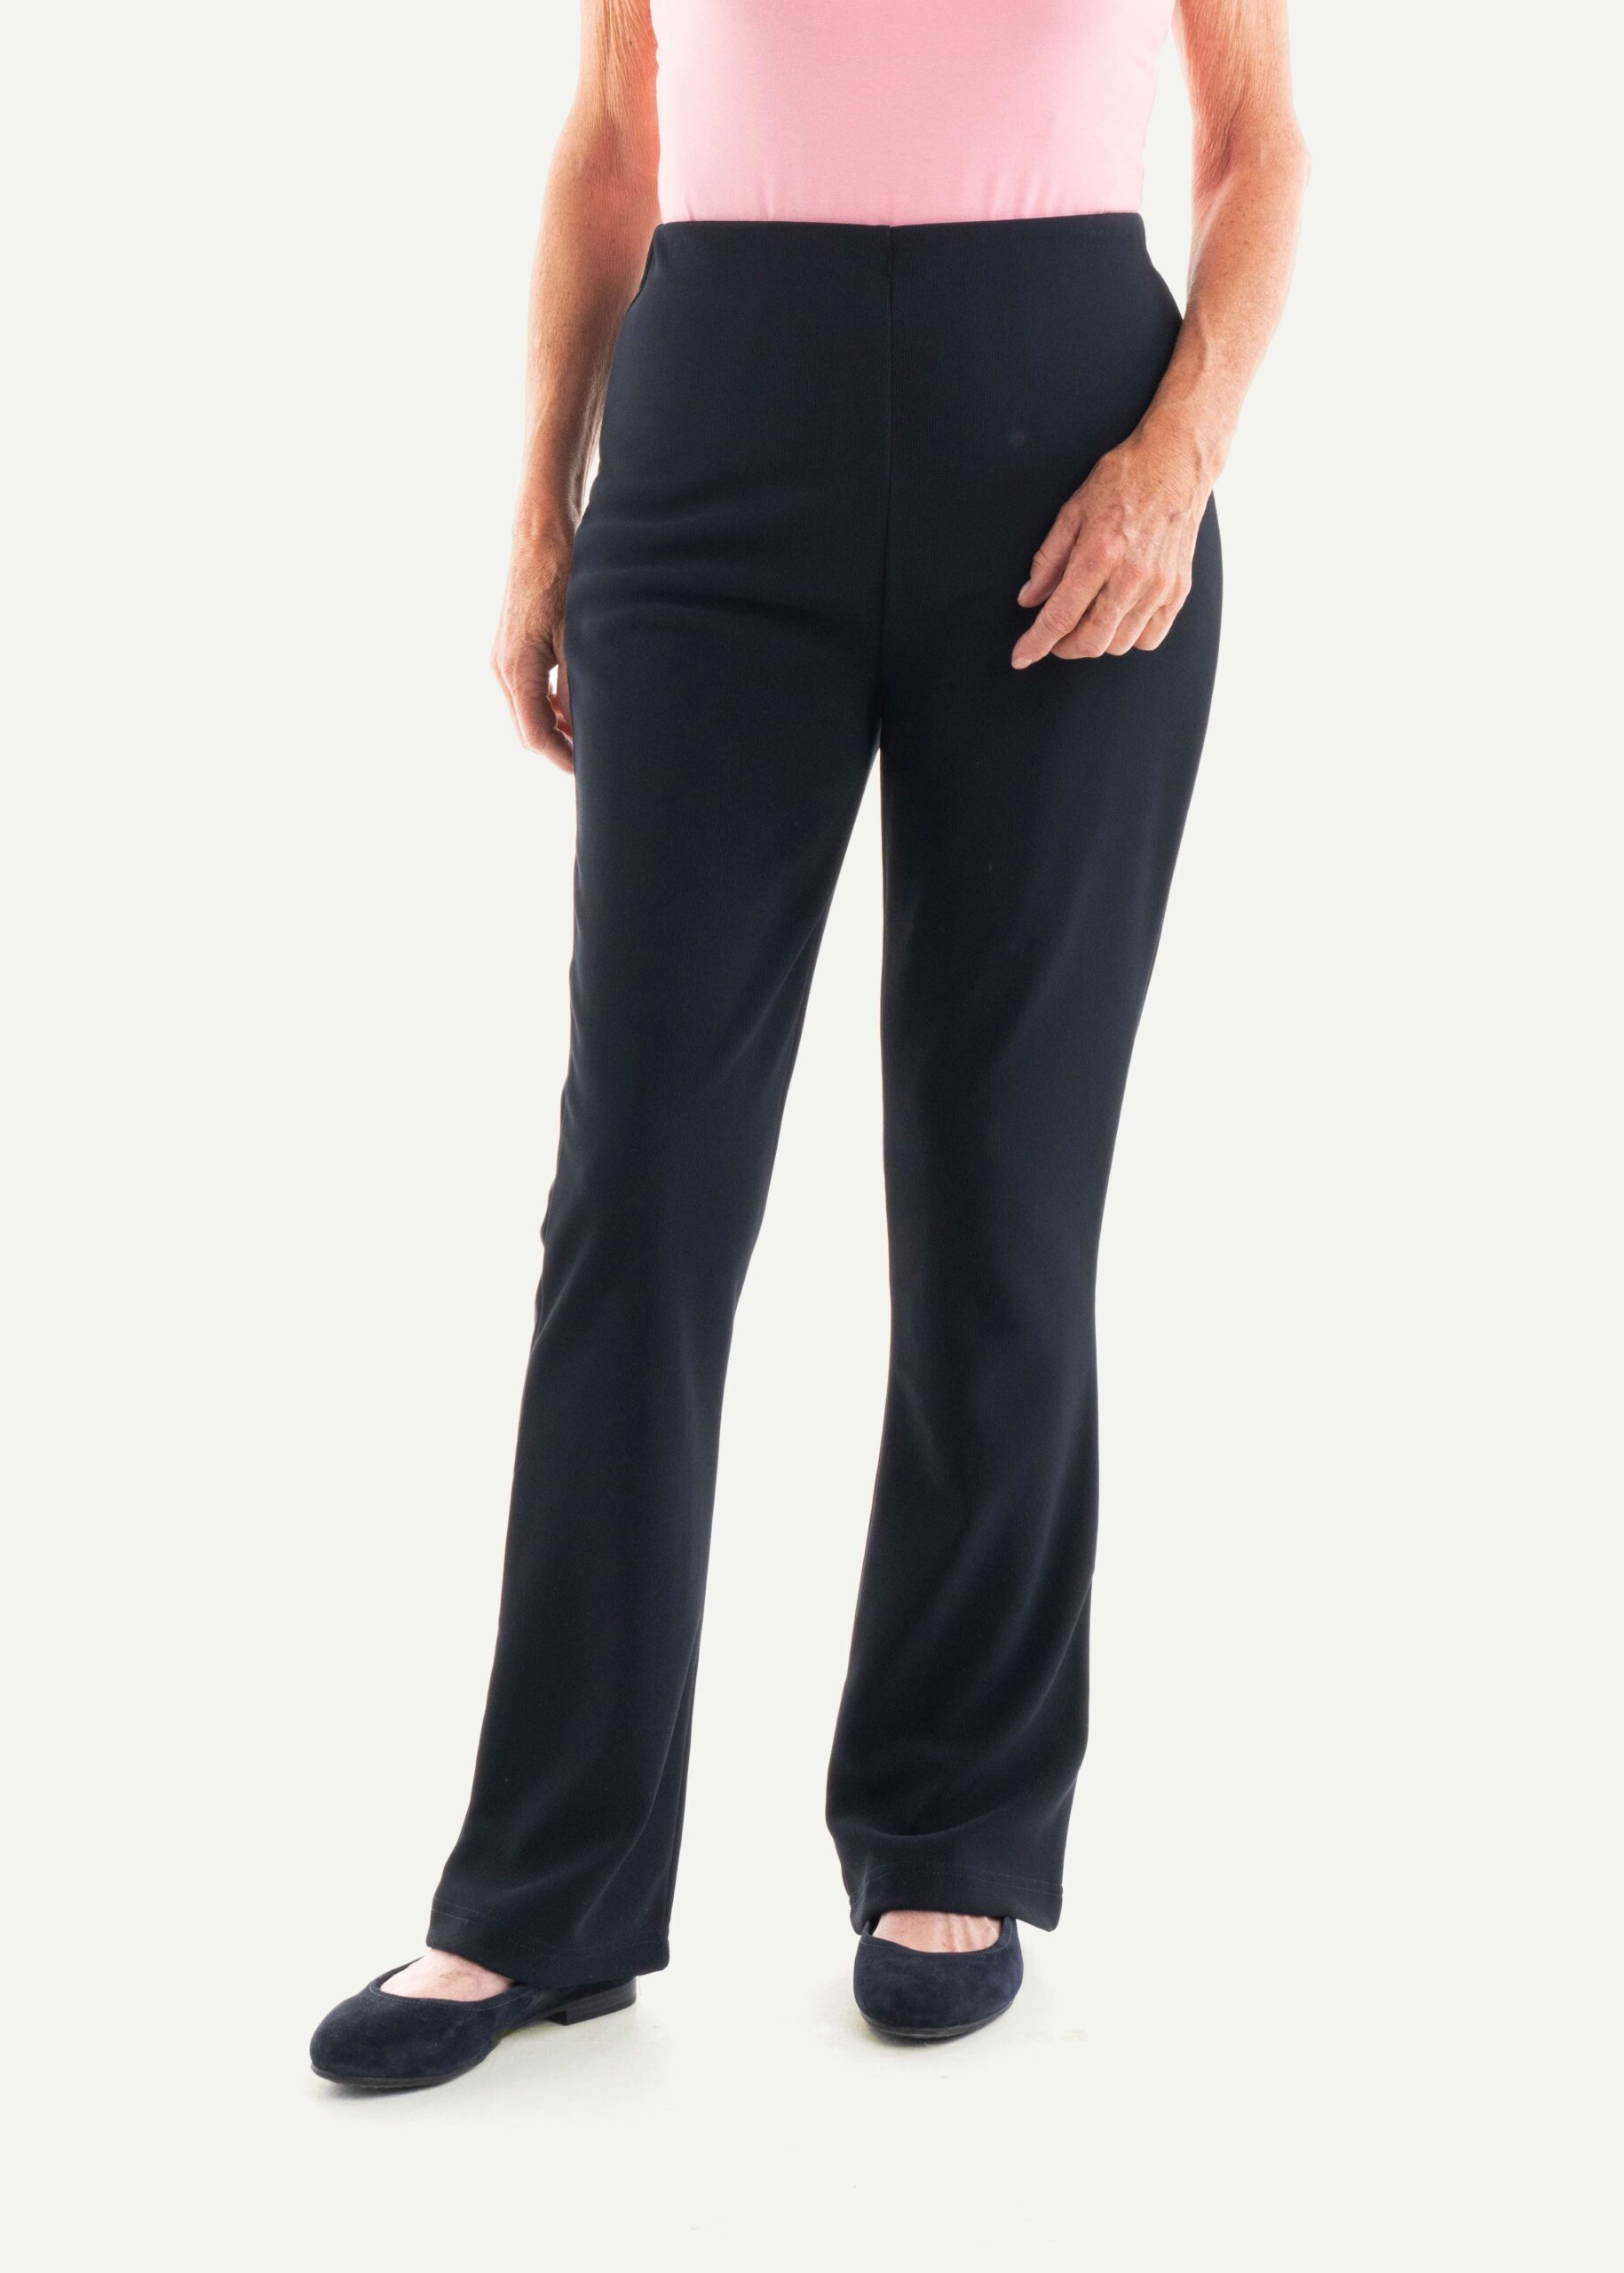 Women’s Elastic Waist Ribbed Trousers – SAVE